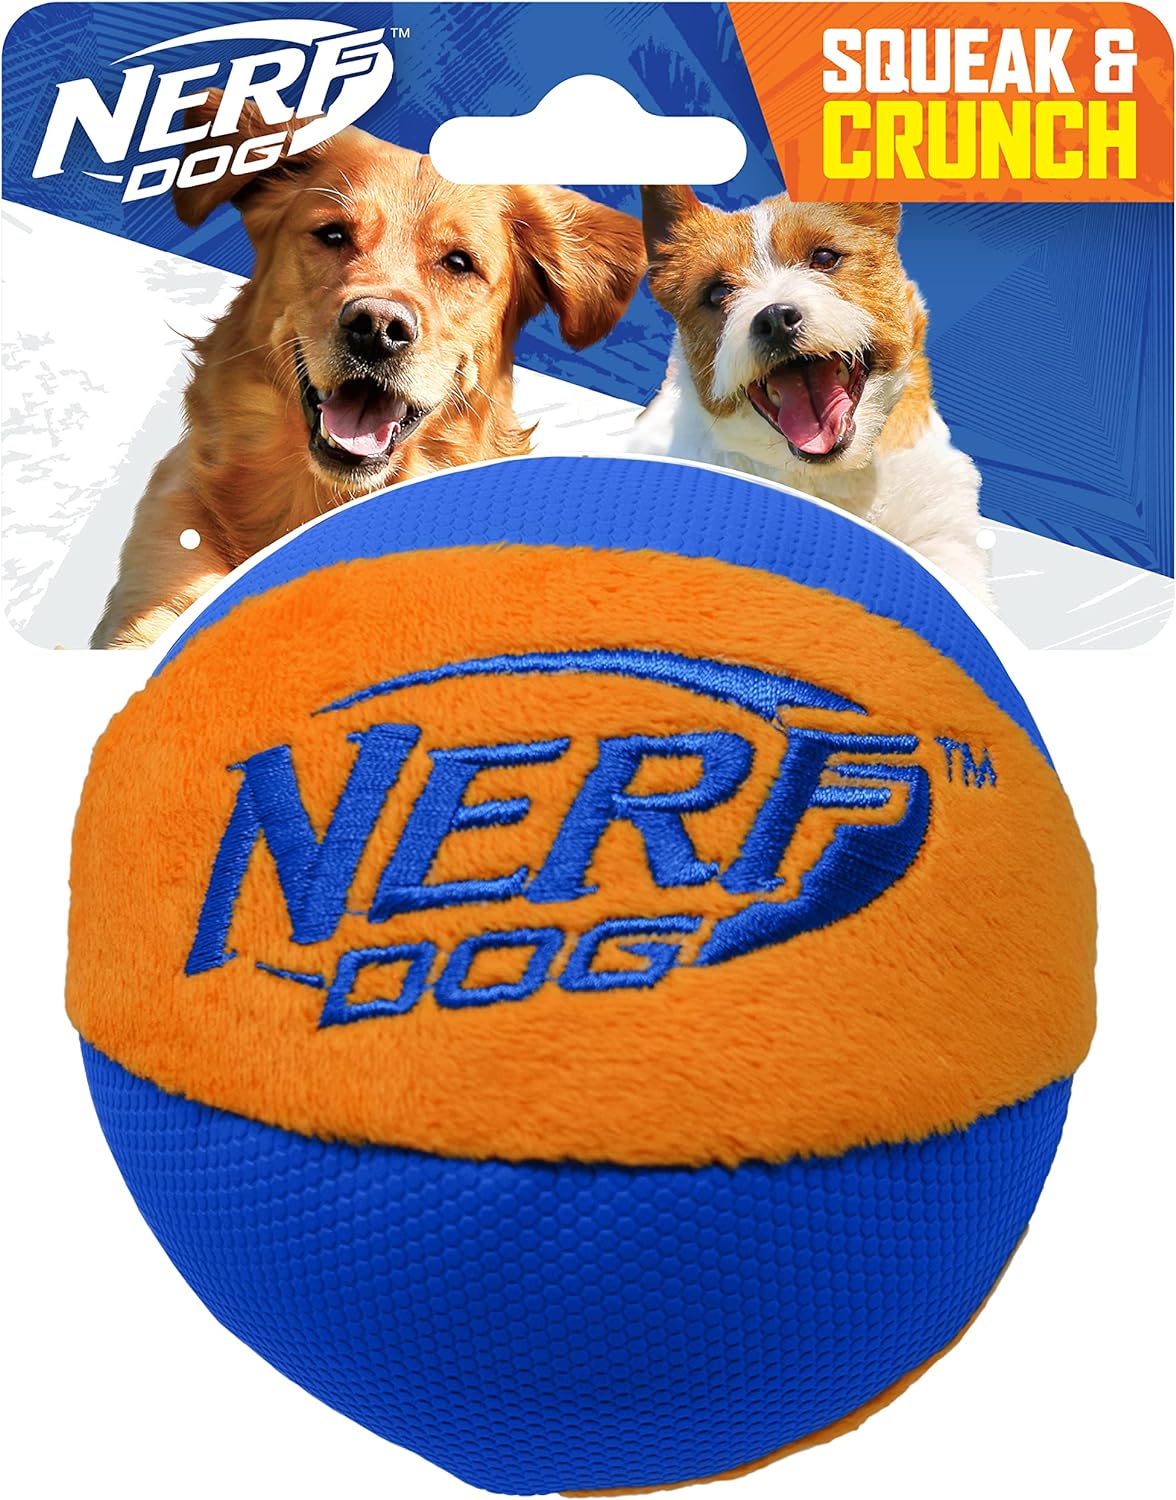 Soft ball that my Aussie Sheperd loves. I can throw it in the house and not damage walls, furniture, etc. This ball is not for dogs that like to shread their toys. It is made very tough but it is a soft toy so supervision is a good idea. My dog is trained not to chew stuff up but she might tear it up if left unattended with it. Great ball!